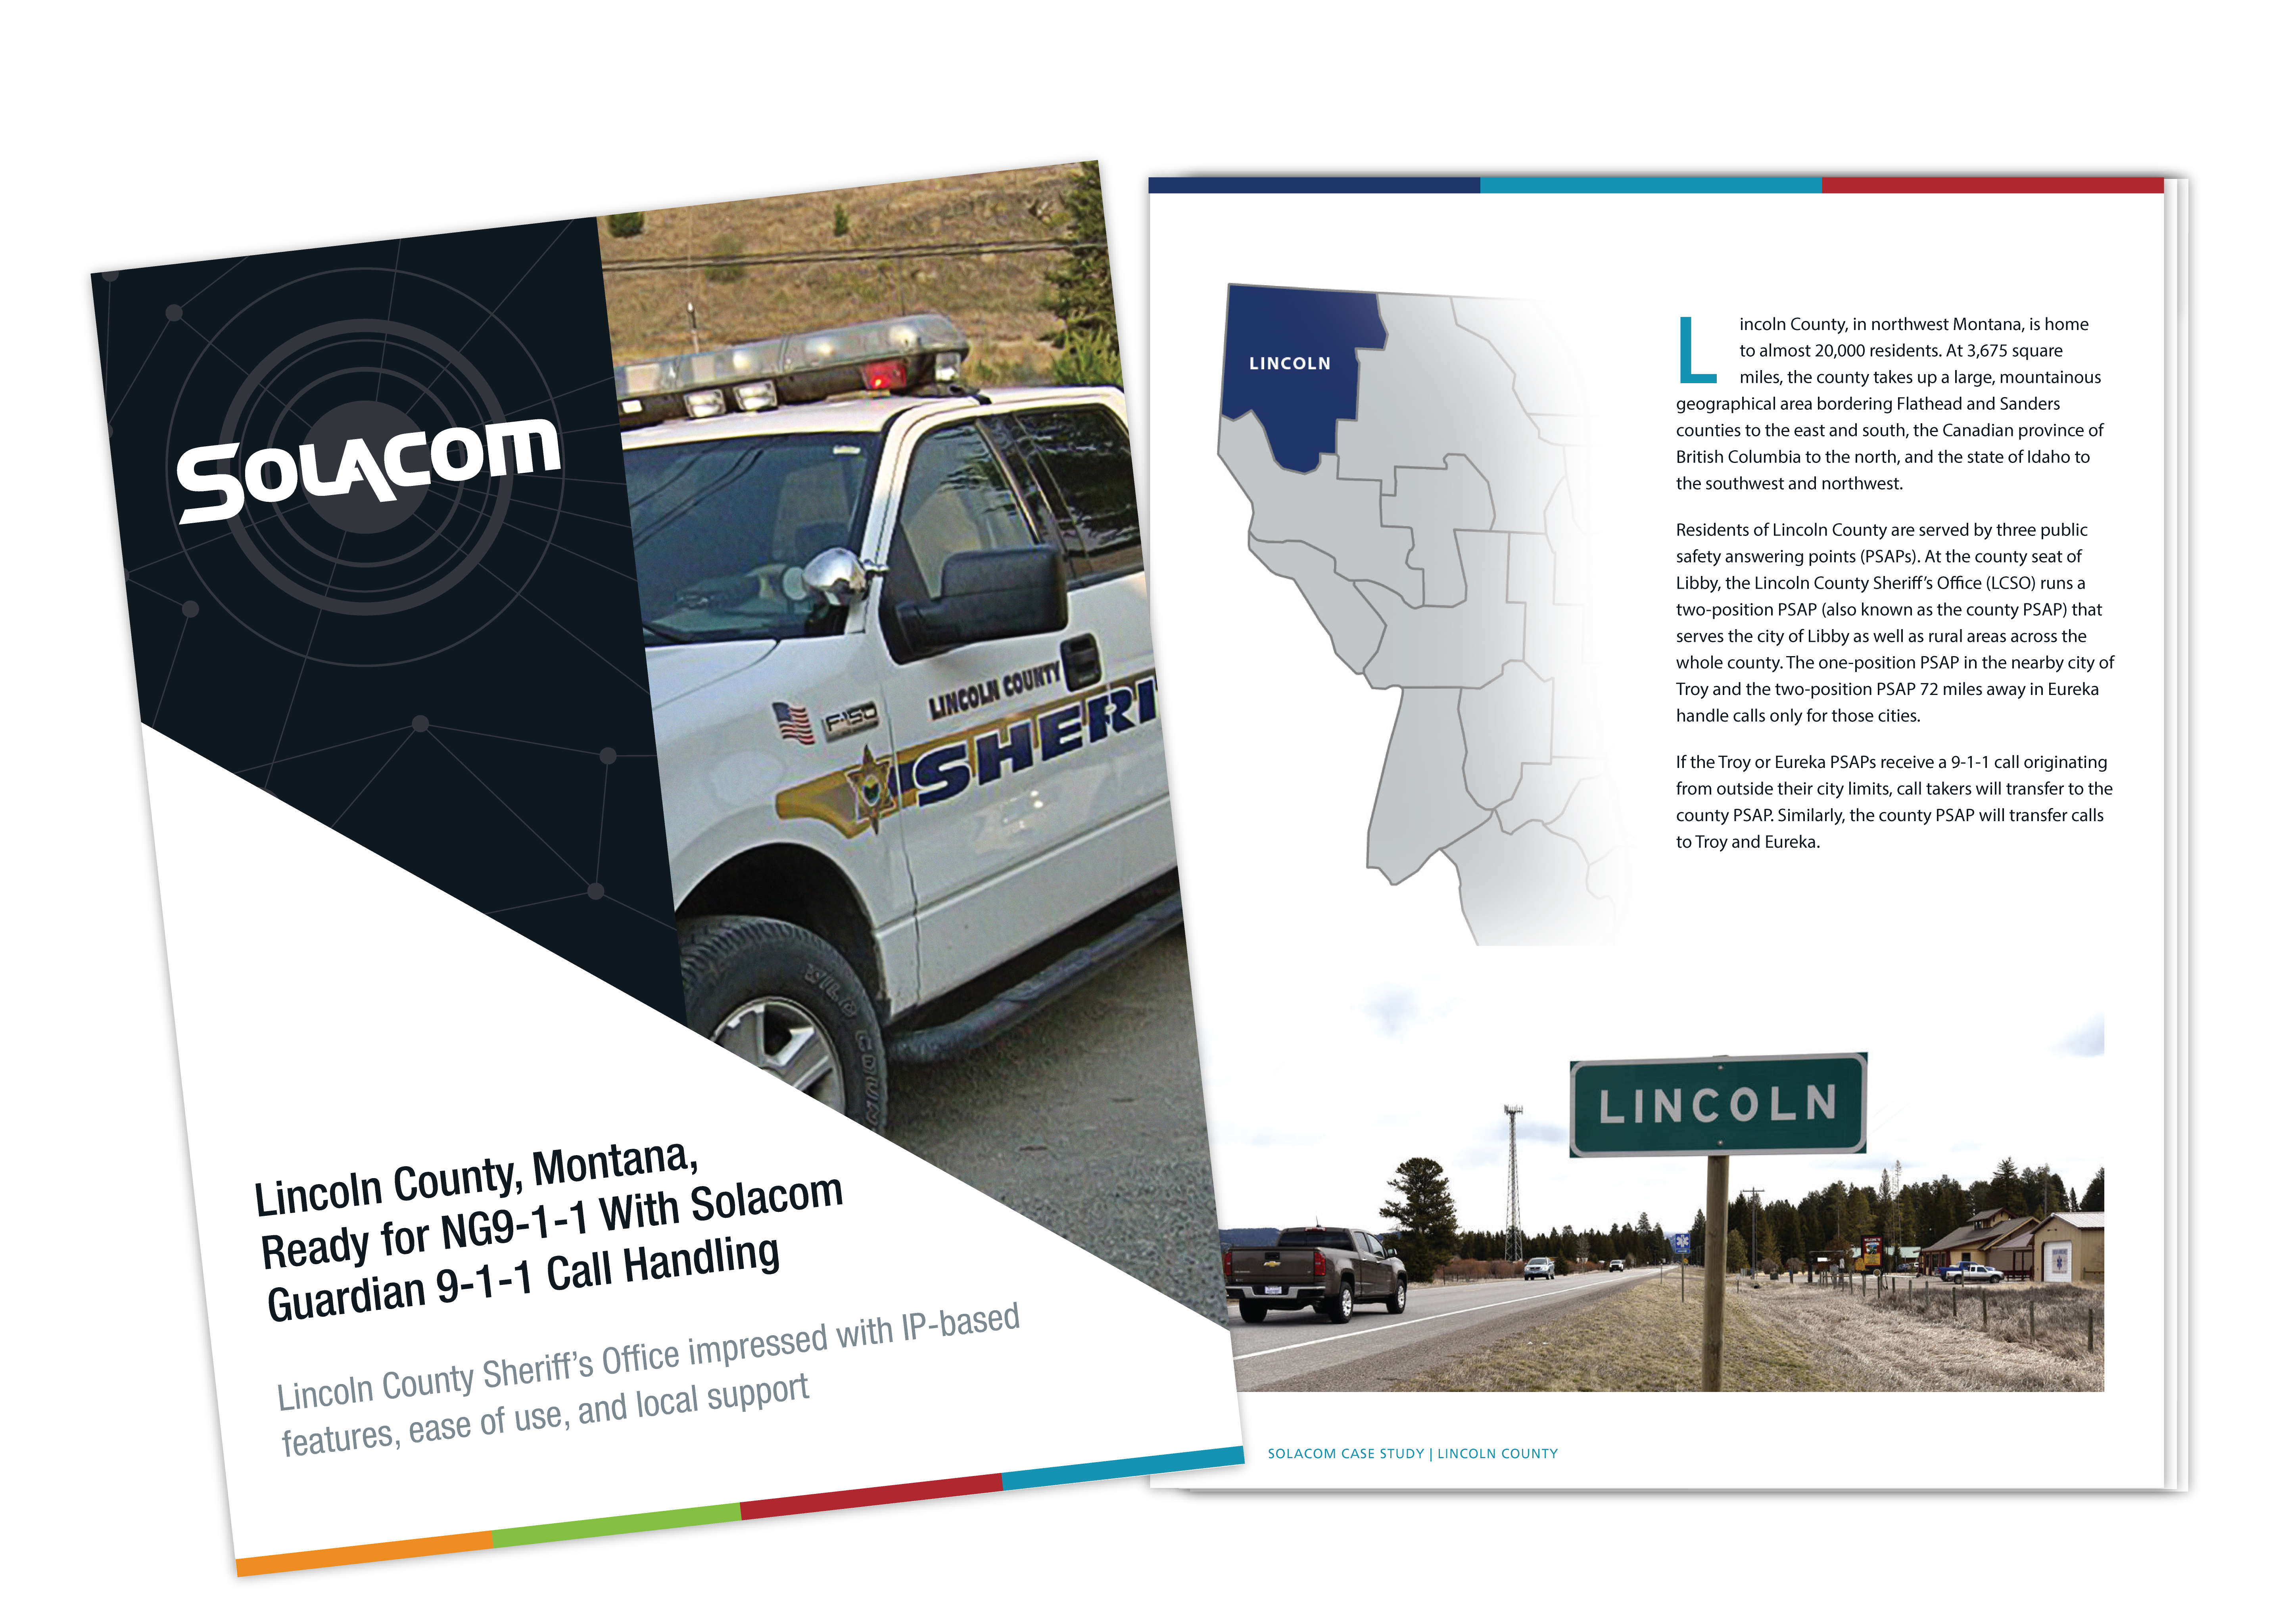 Lincoln County, Montana, Ready for NG9-1-1 With Solacom Guardian 9-1-1 Call Handling, a Solacom case study